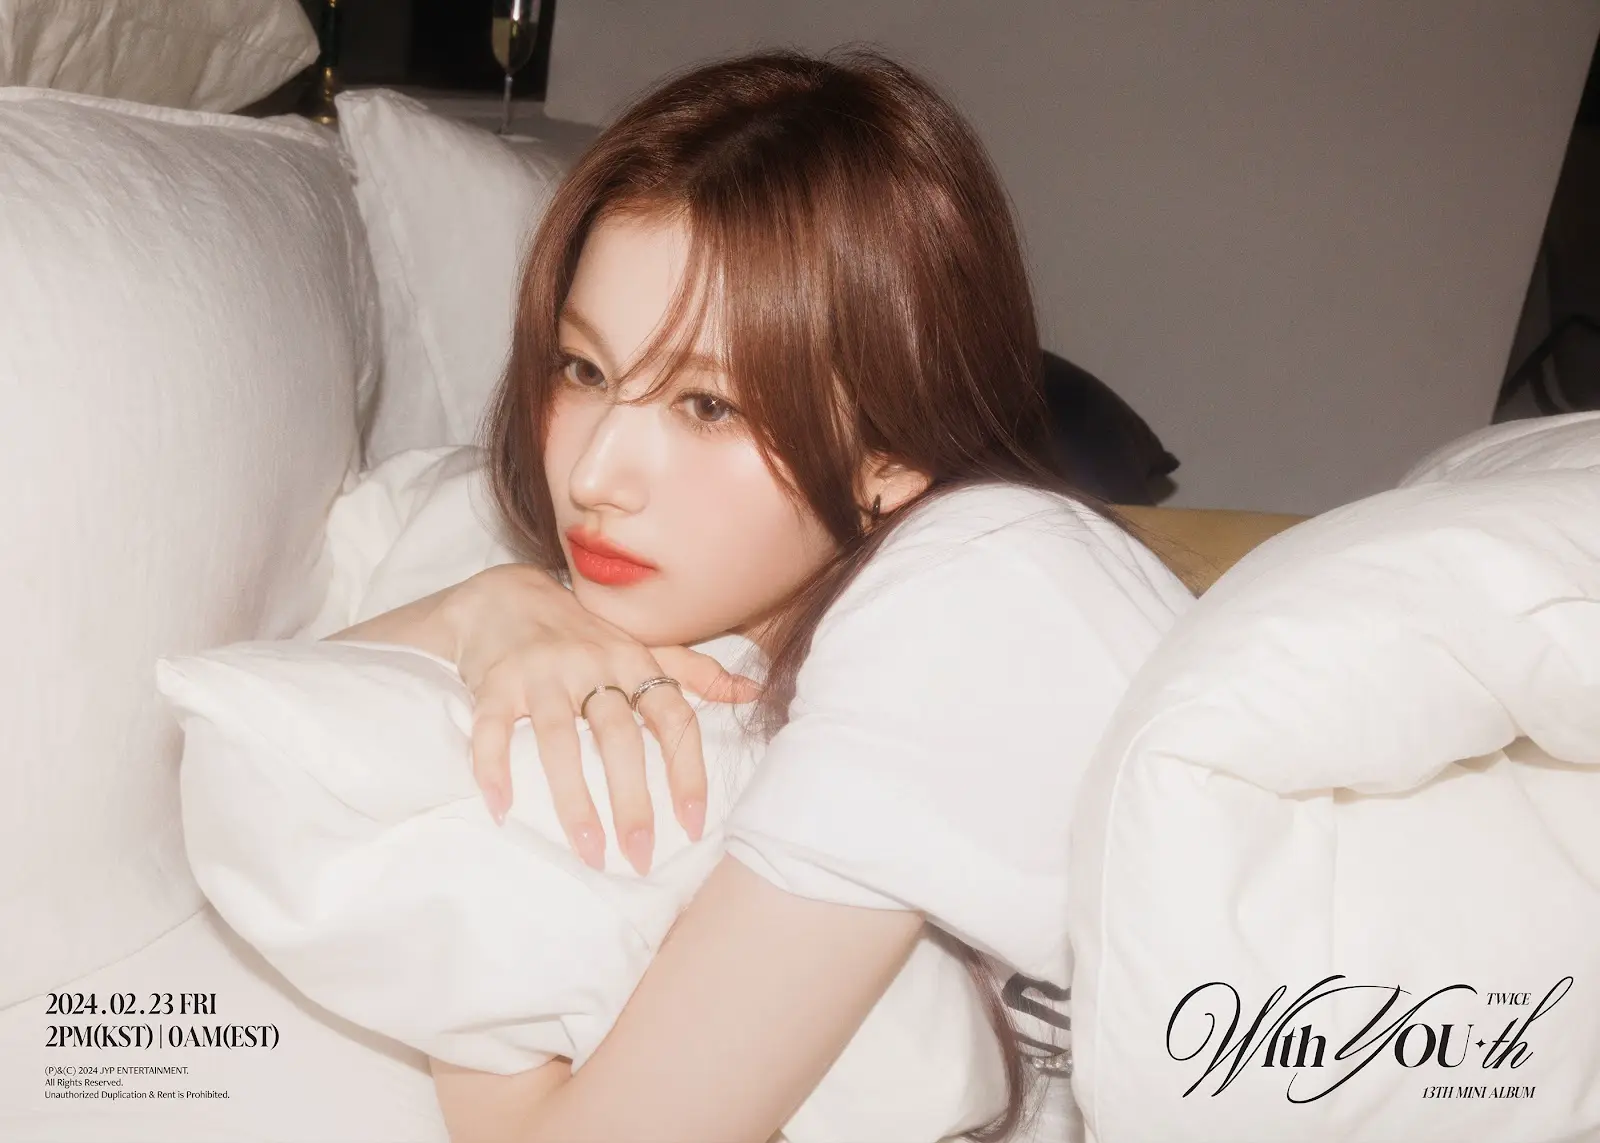 TWICE 13TH MINI ALBUM “With YOU-th” Concept Photo | mbong.kr 엠봉